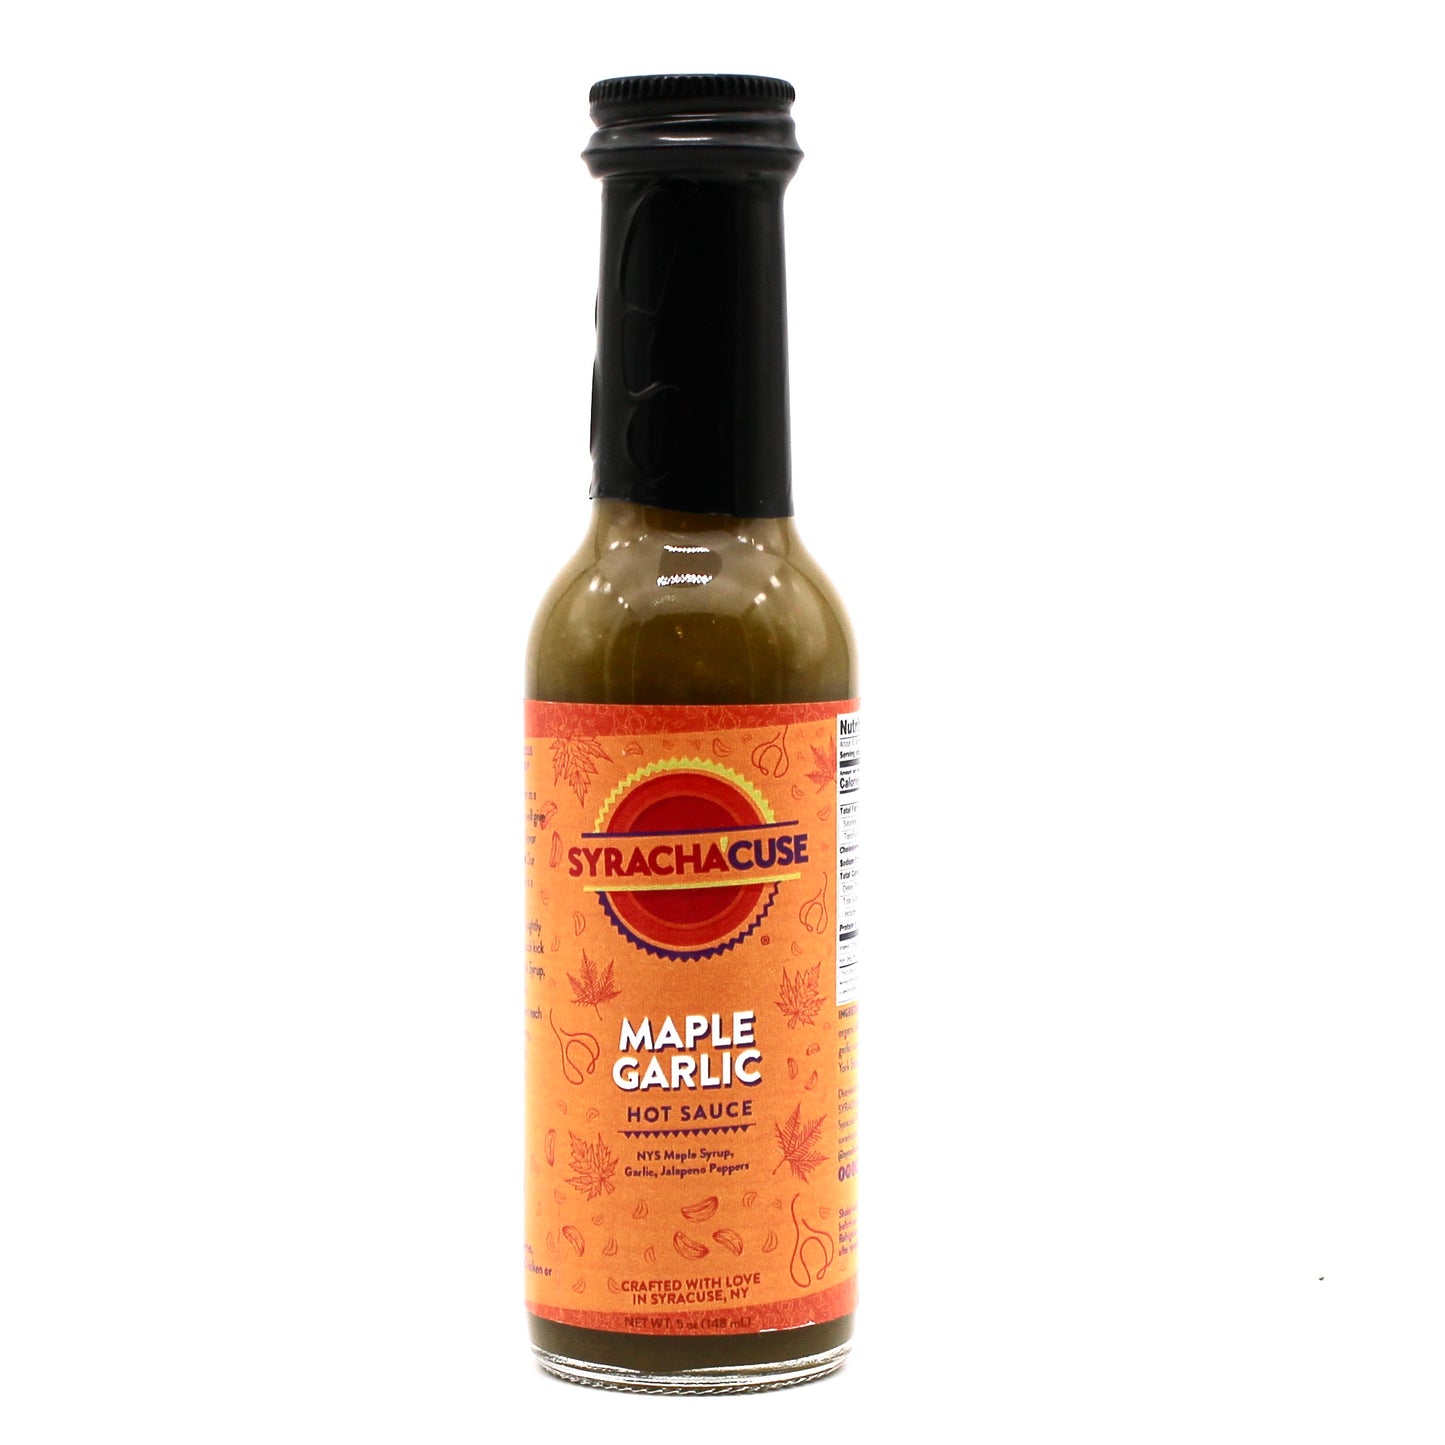 MAPLE GARLIC HOT SAUCE, Unique combination, extraordinary flavor, you'll love this sauce!